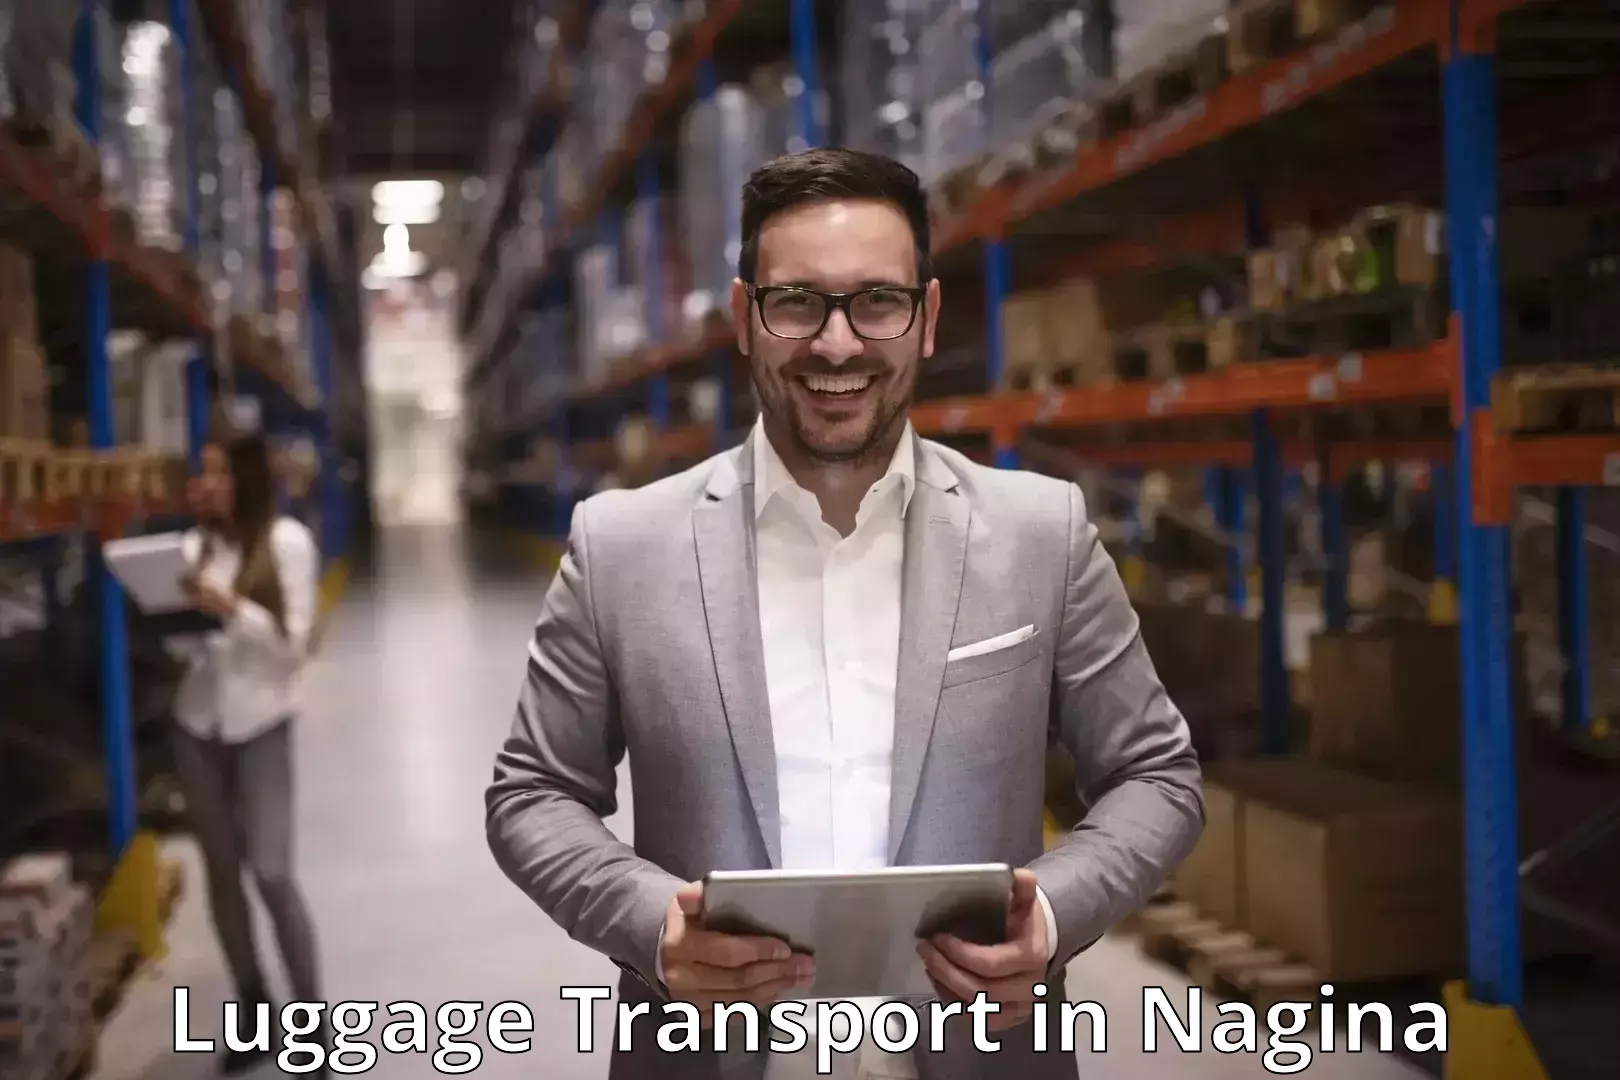 Luggage transport consulting in Nagina